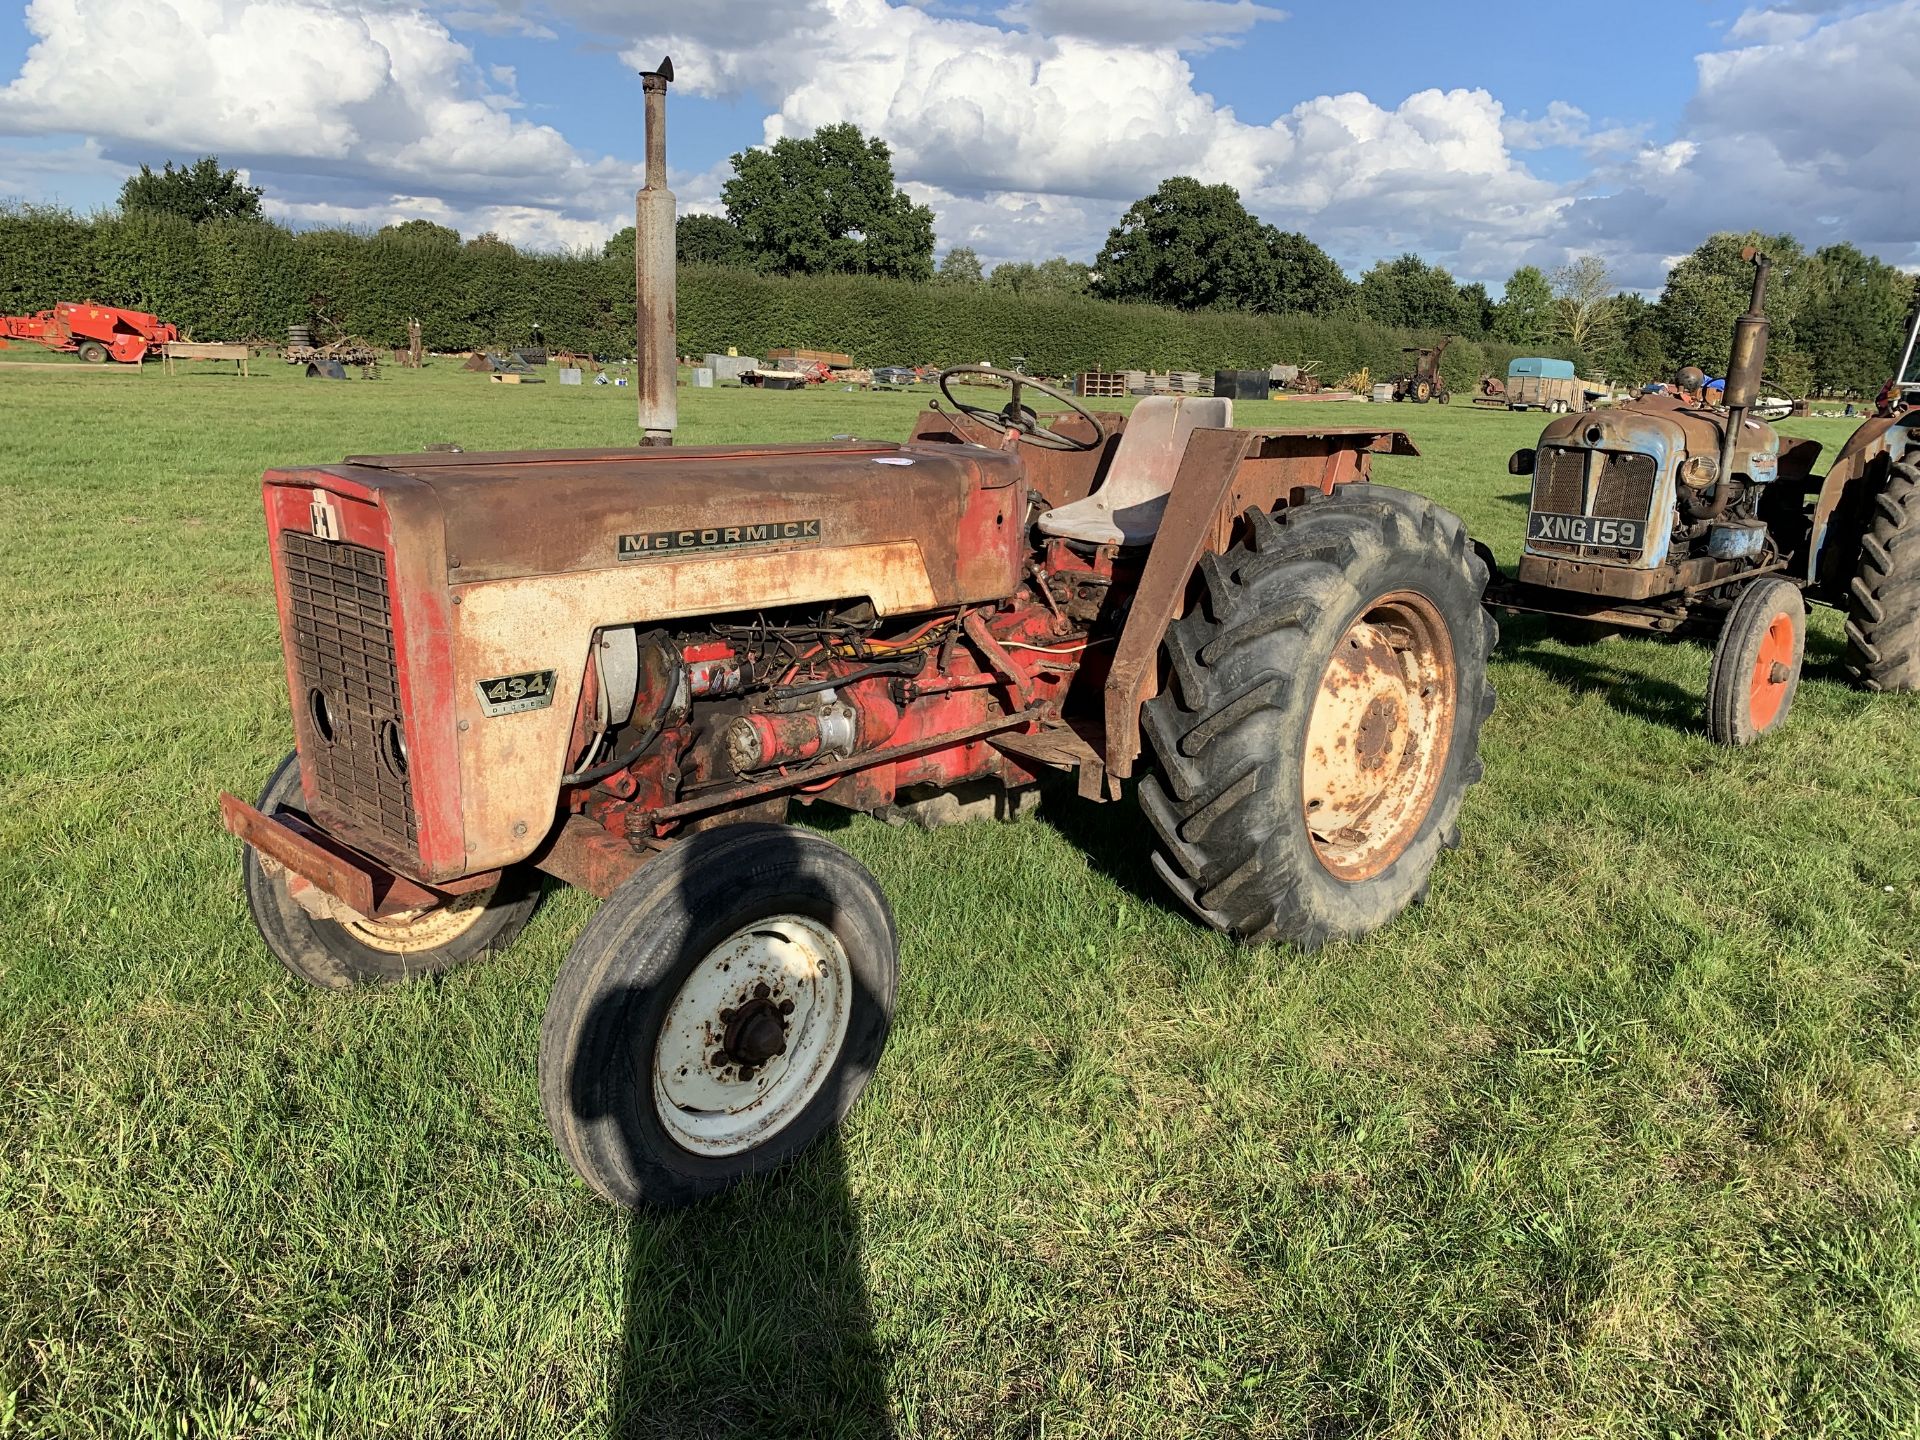 1966 McCormick 434 tractor, HJR 327D, 5819hrs indicated, diesel